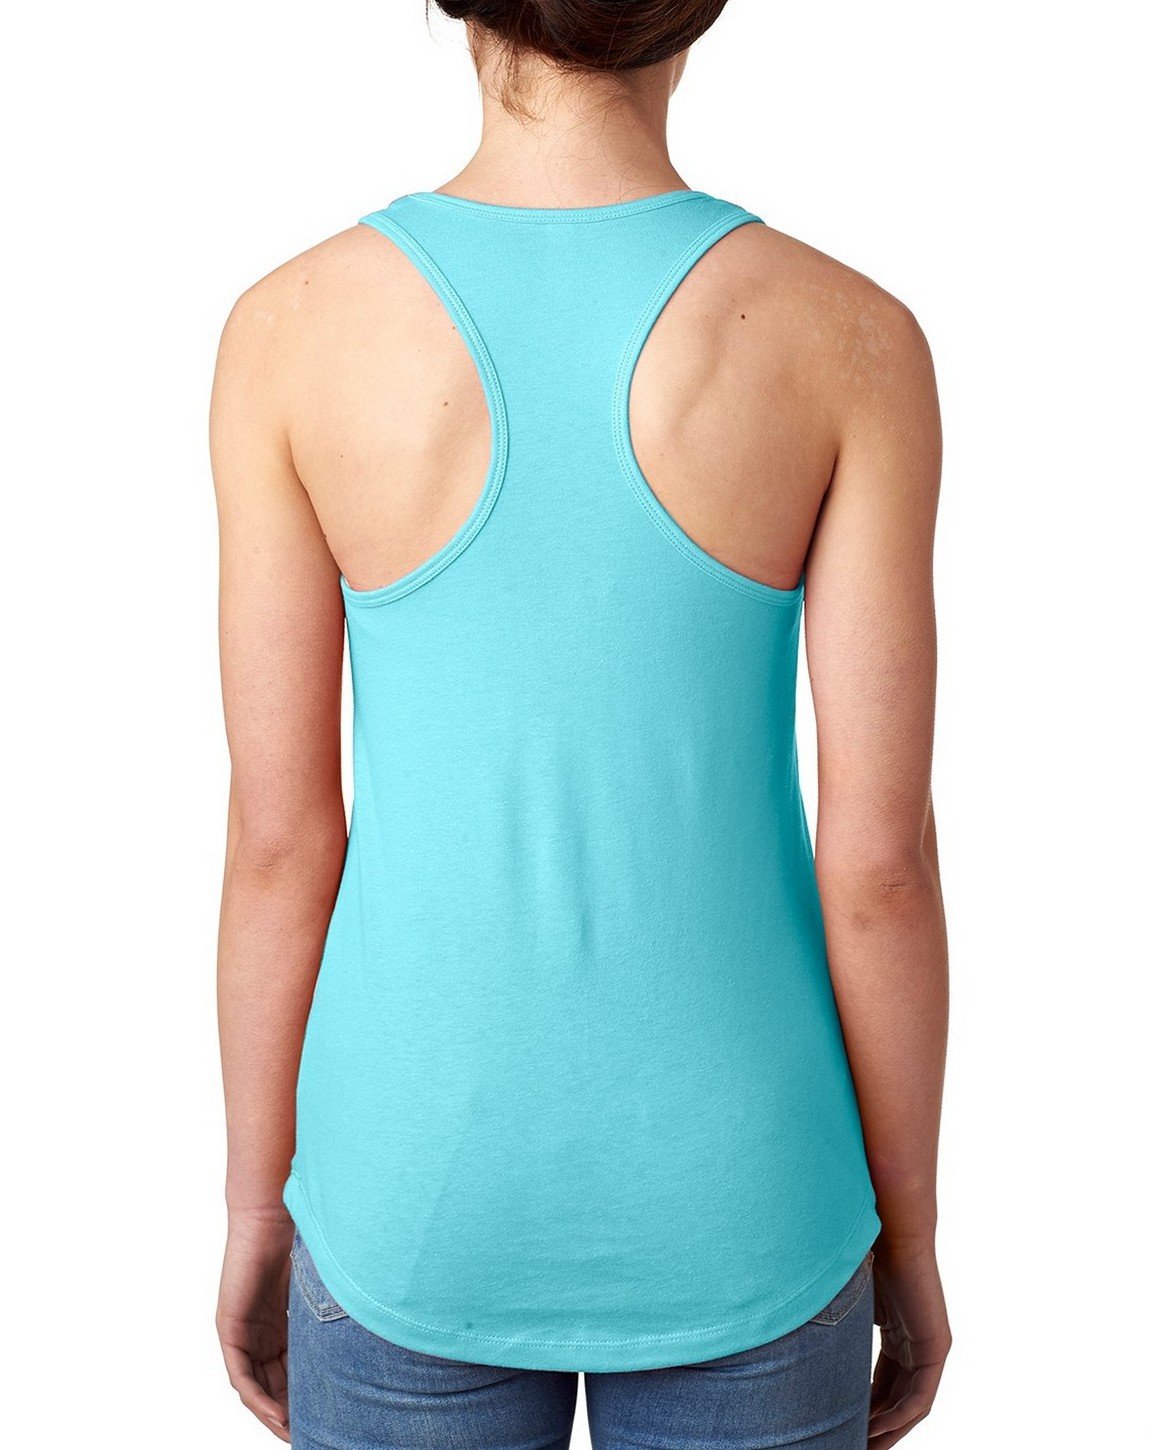 Next Level Ideal Racerback Tank Cancun Large (Pack of 5)